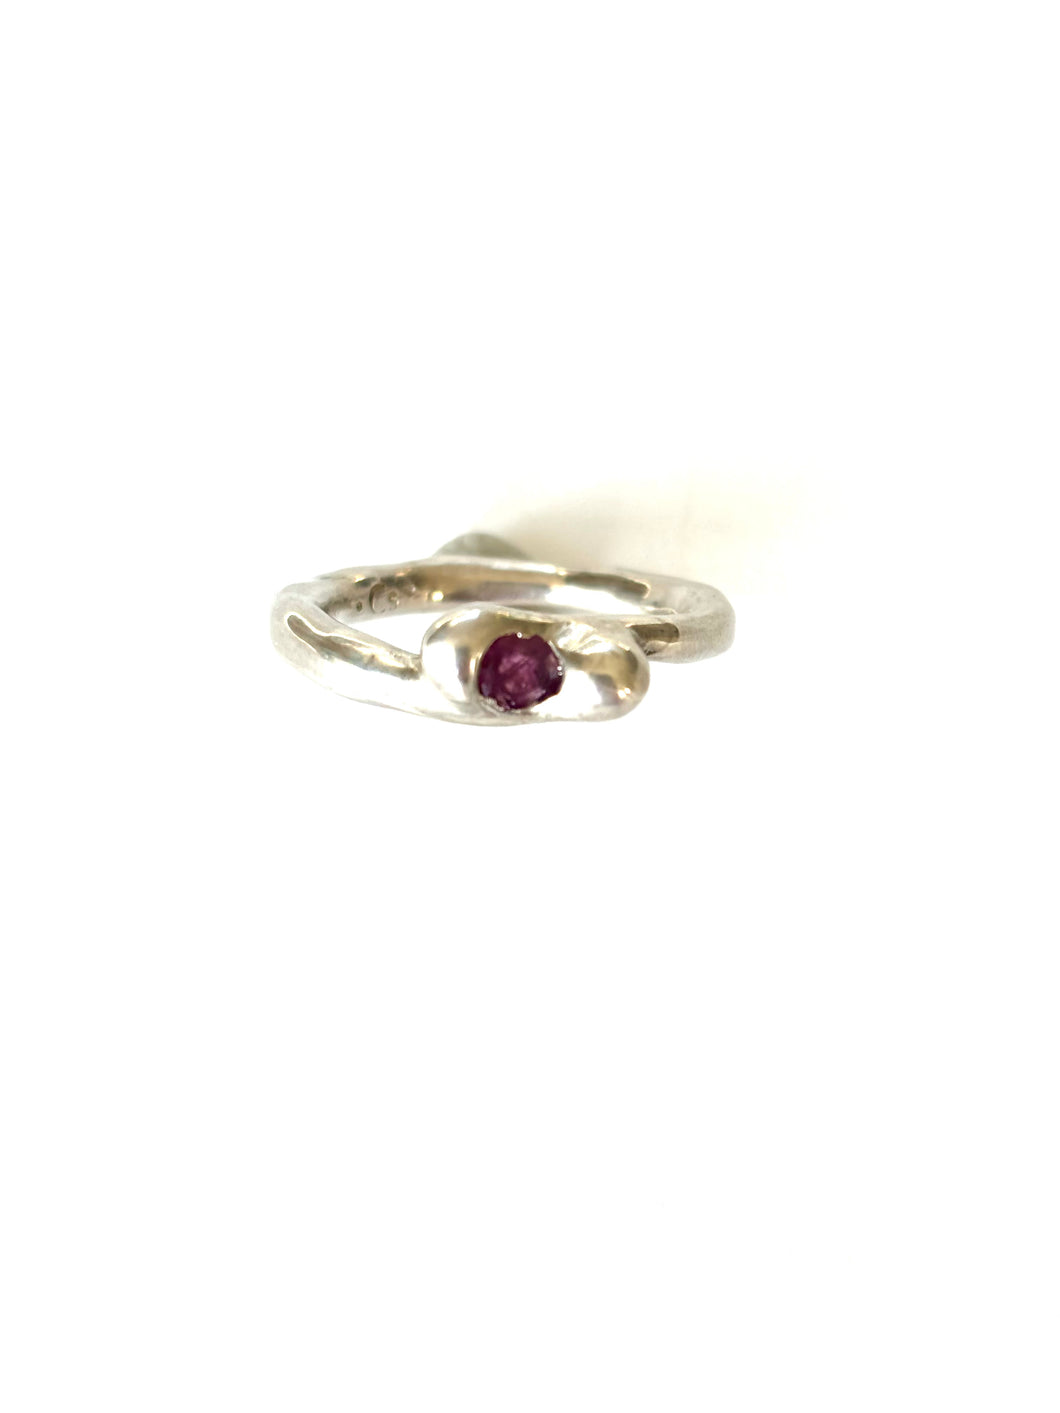 Ruby bowtie ring - sterling silver